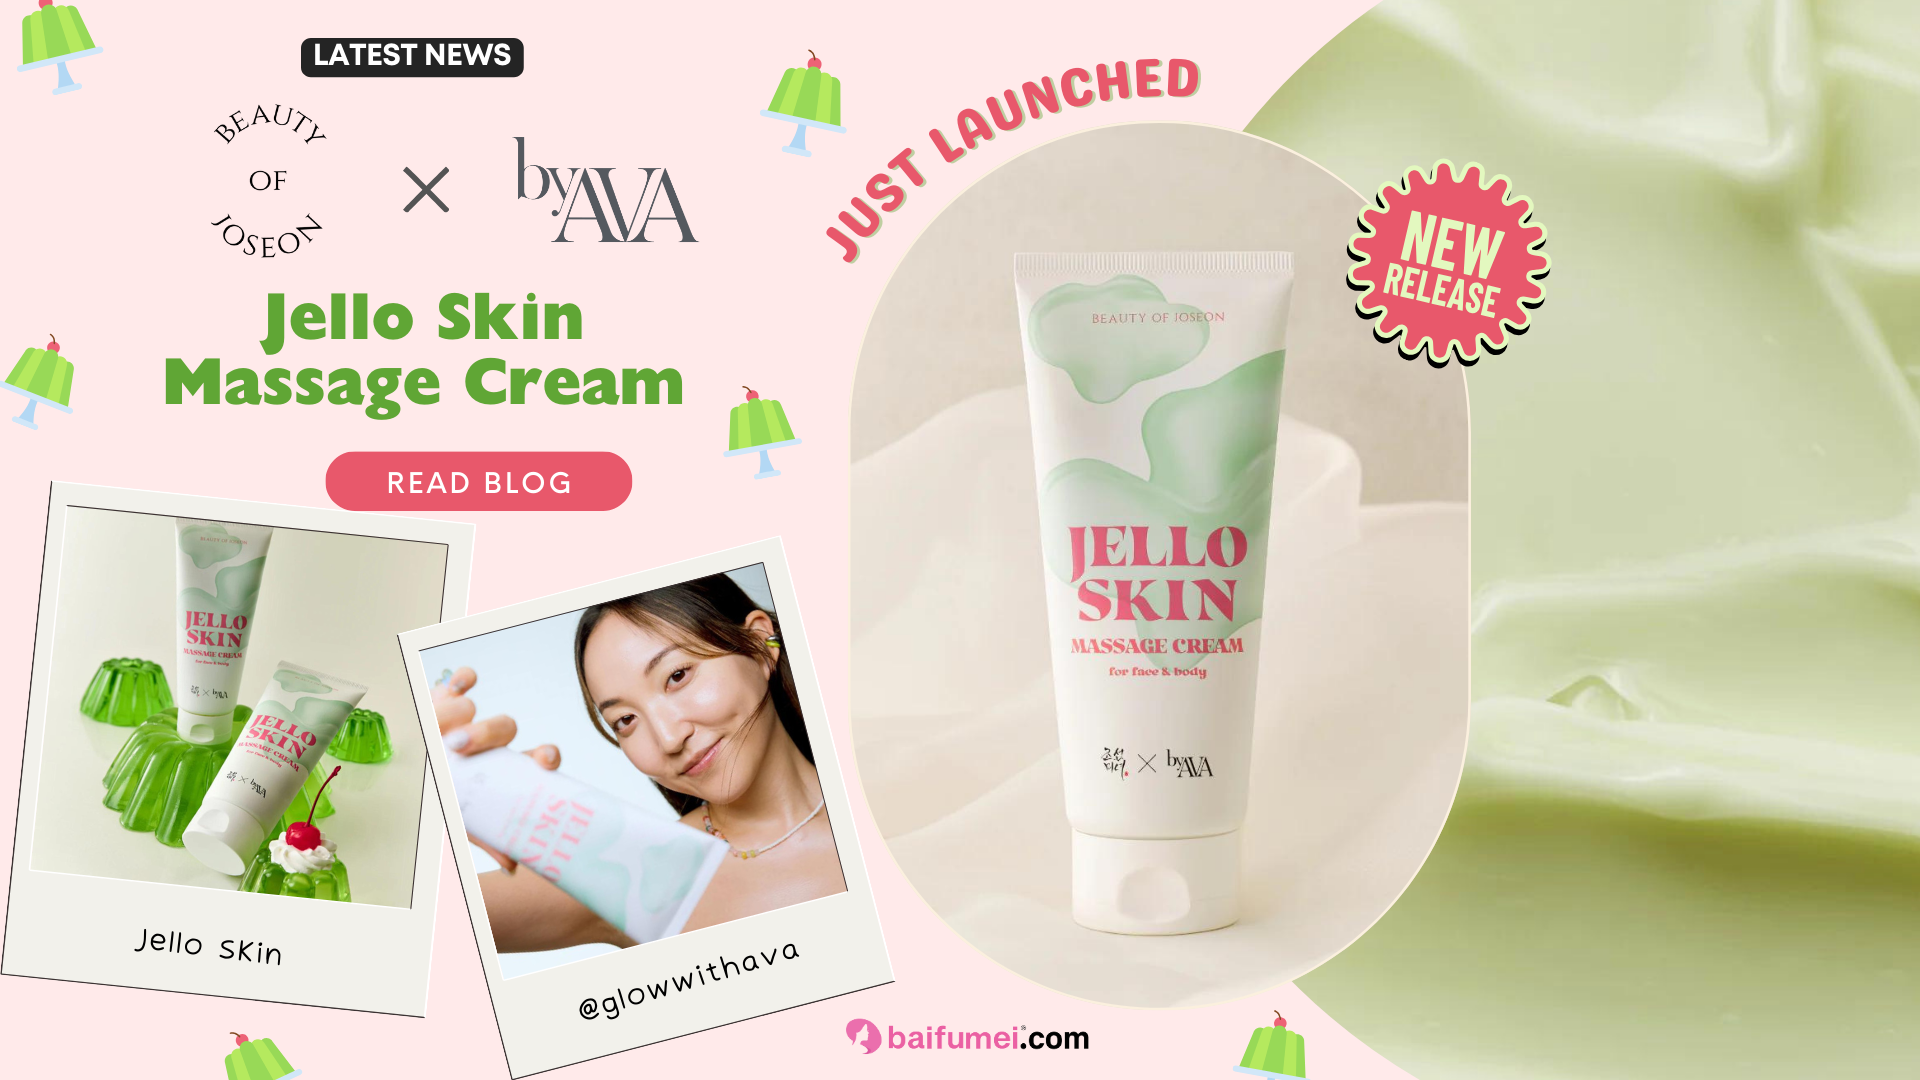 Just Launched: BOJ x byAva collab is here! Jello Skin Massage Cream now available on Baifumei